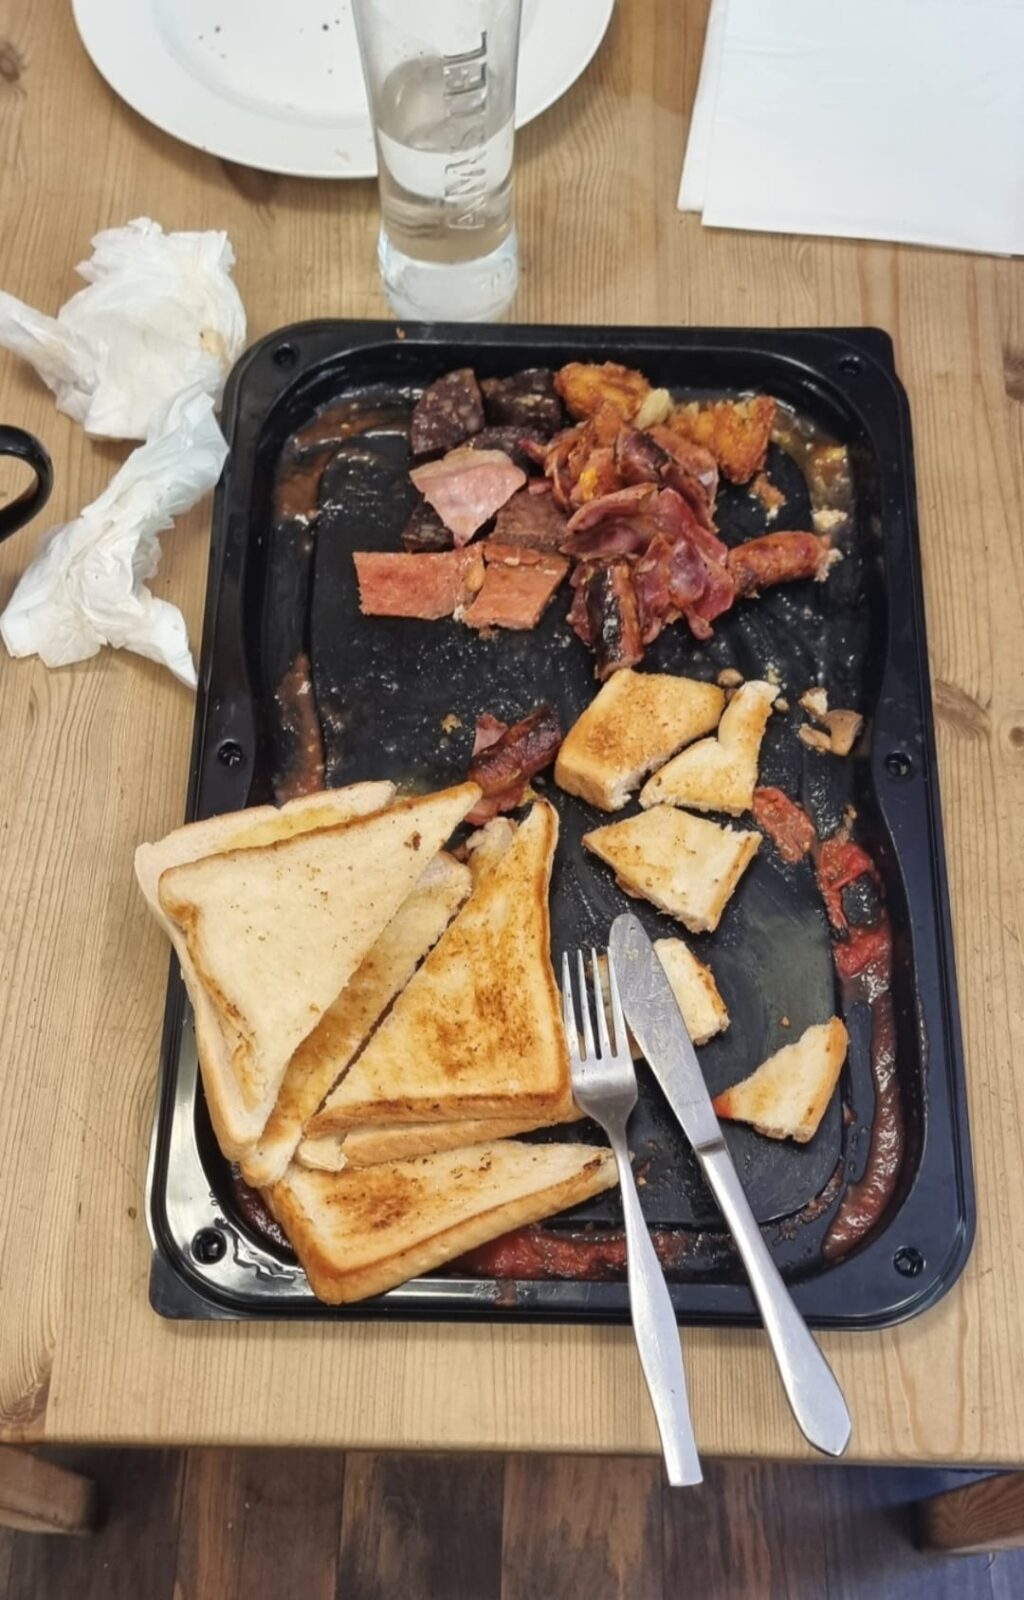 A giant full english challenge, left unfinished in Bury